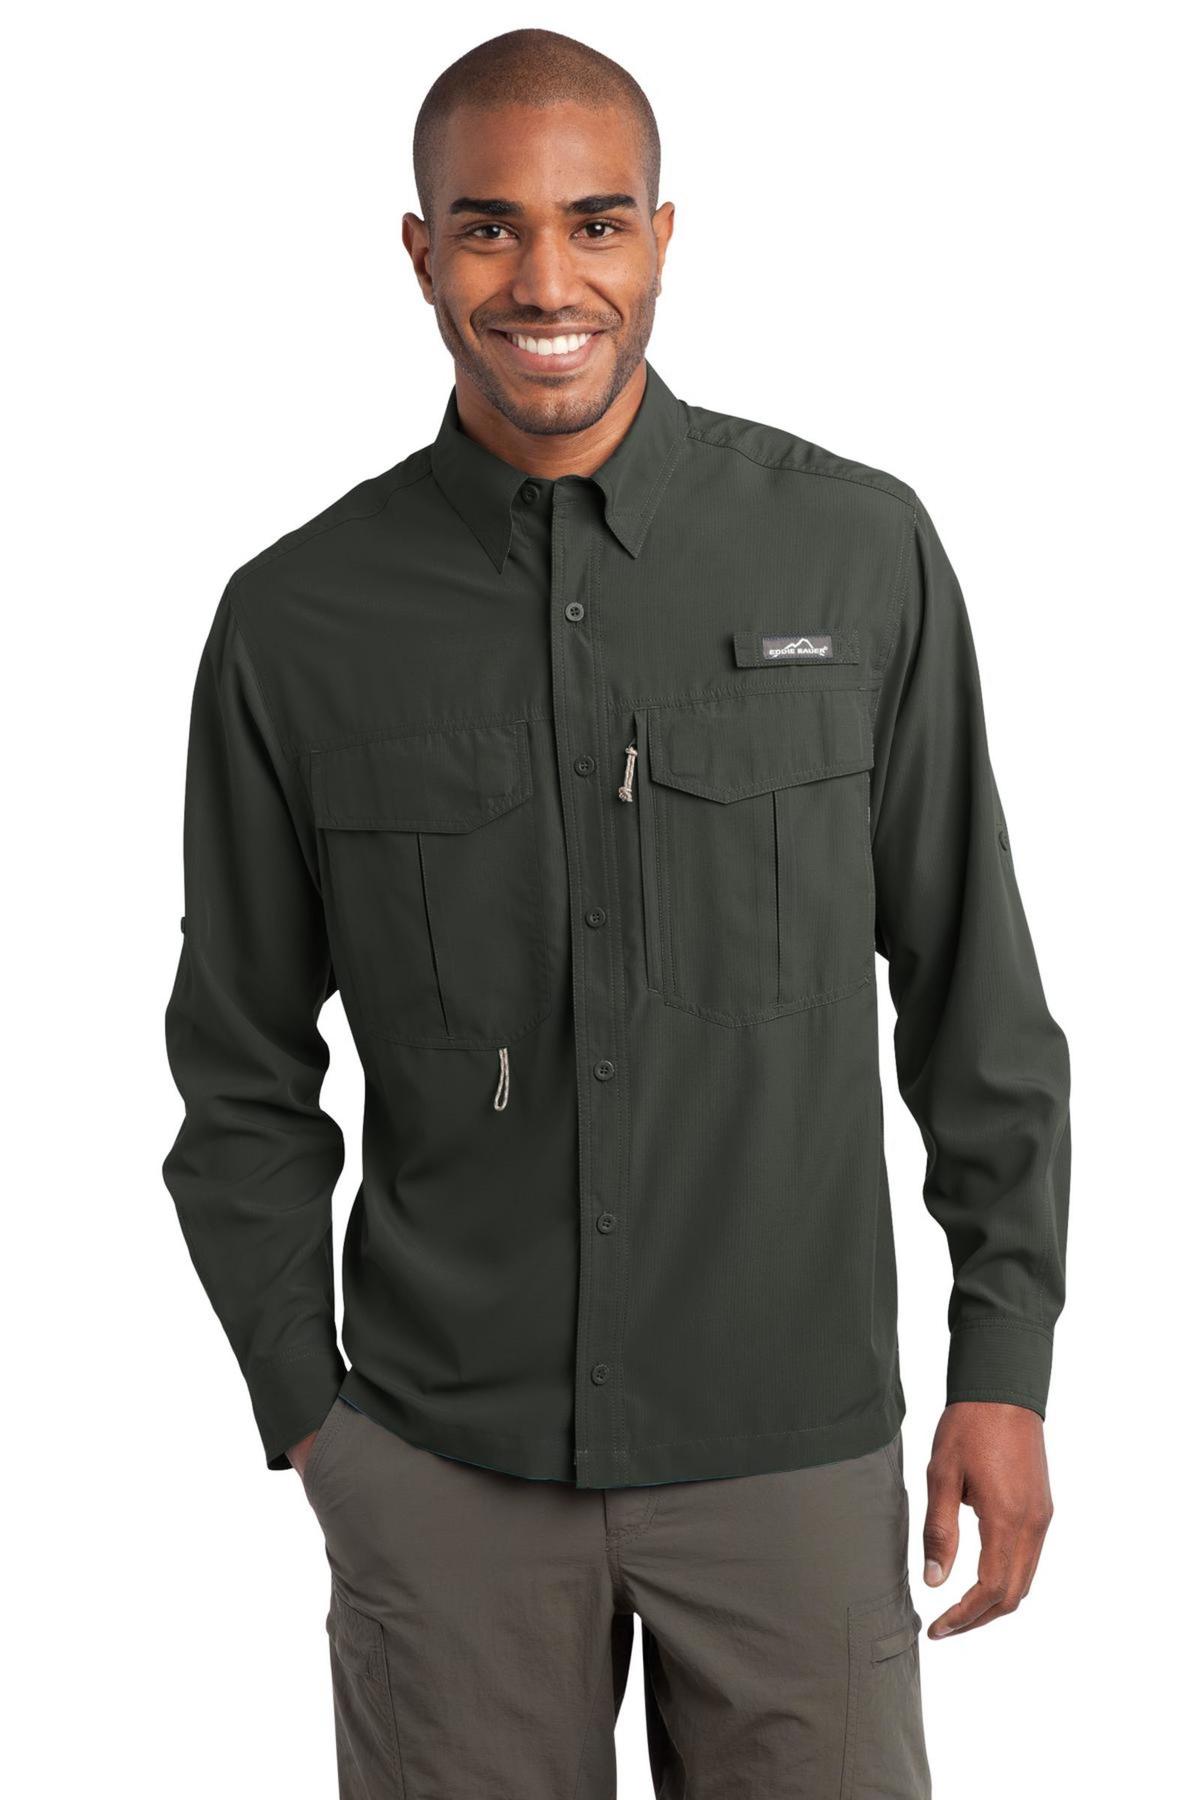 Eddie Bauer Embroidered Men's Long Sleeve Performance Fishing